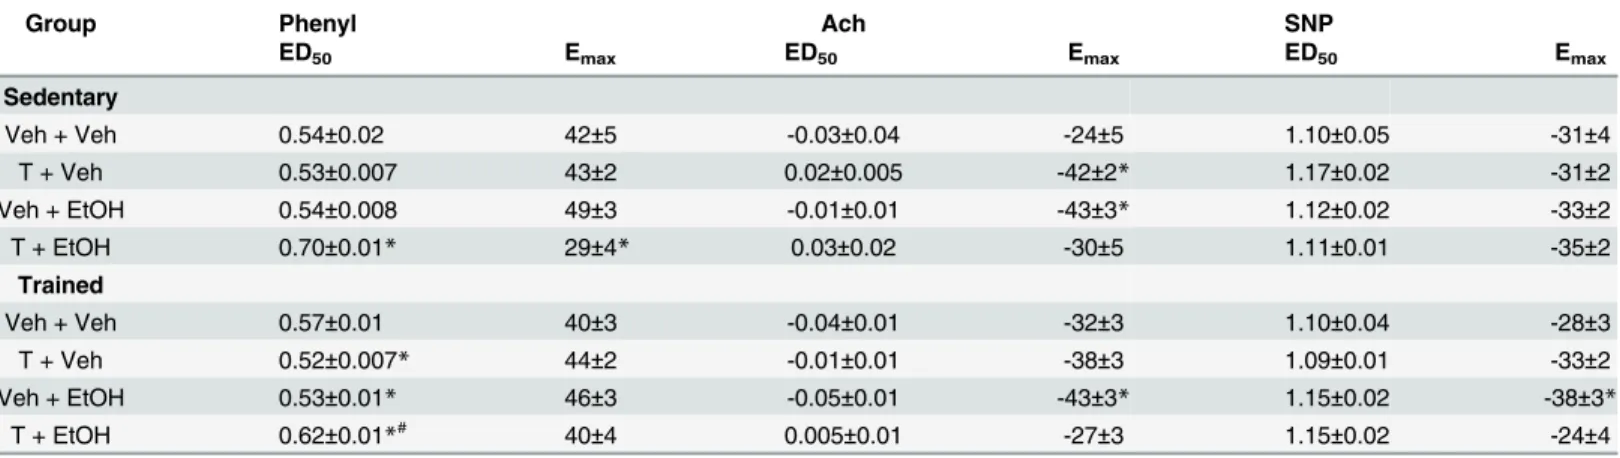 Table 1. Maximal effect (E max ) and dose at 50% of the MAP range (ED 50 ) for phenylephrine (Phenyl), acetylcholine (Ach) and sodium nitroprusside (SNP) dose-response curves in animals sedentary and subjected to exercise training on the treadmill (trained